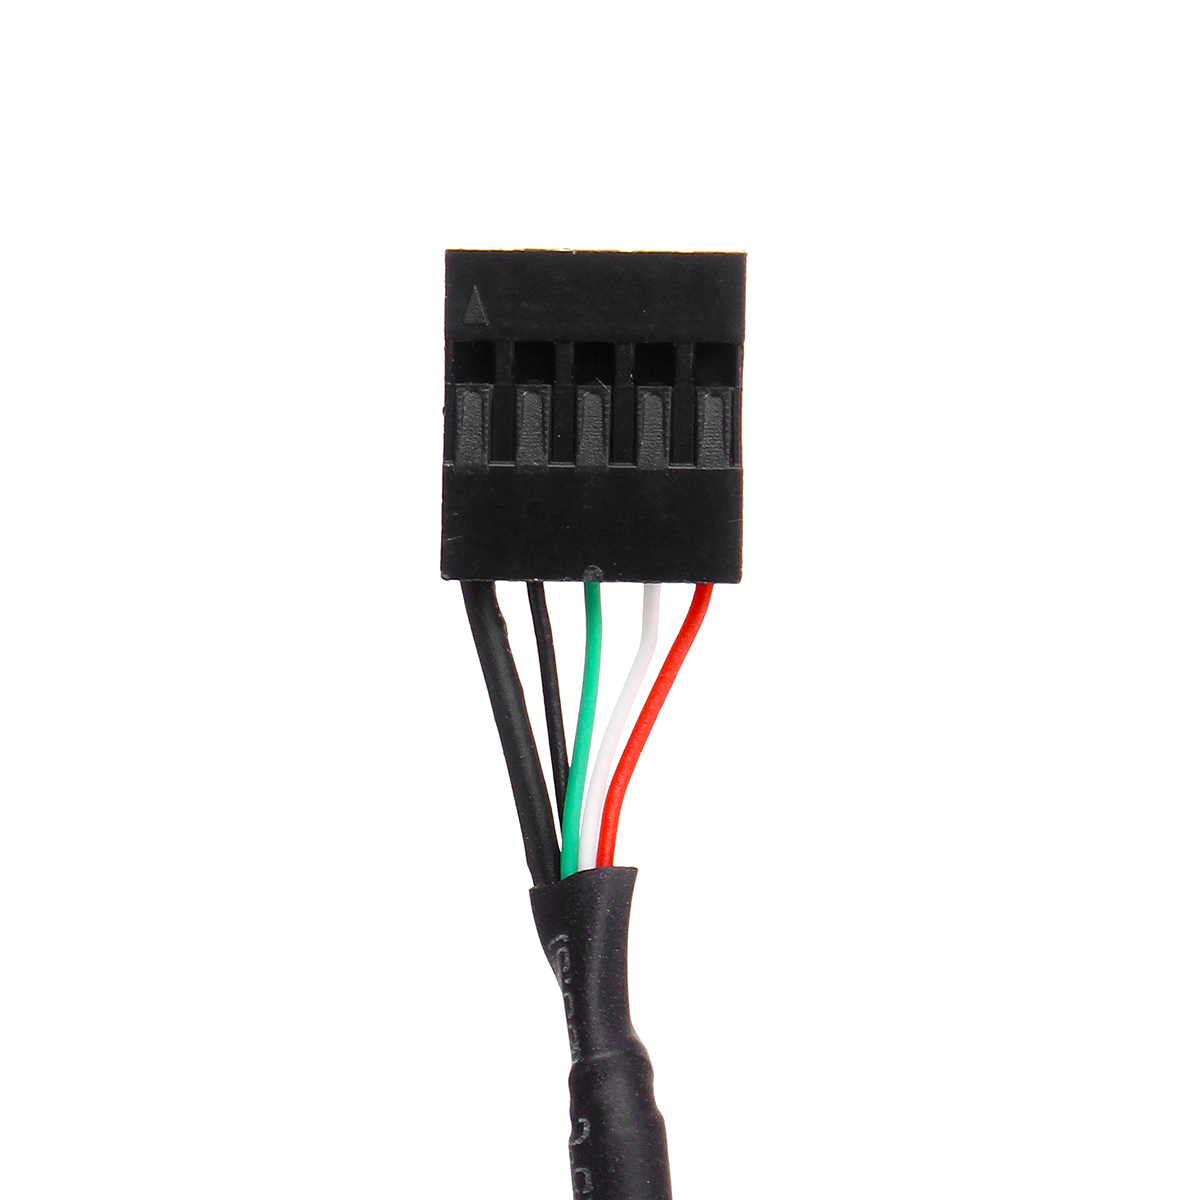 CPU-Cooler-USB-Interface-Cable-Cool-for-CORSAIR-Hydro-Series-H80i-H100i-1740594